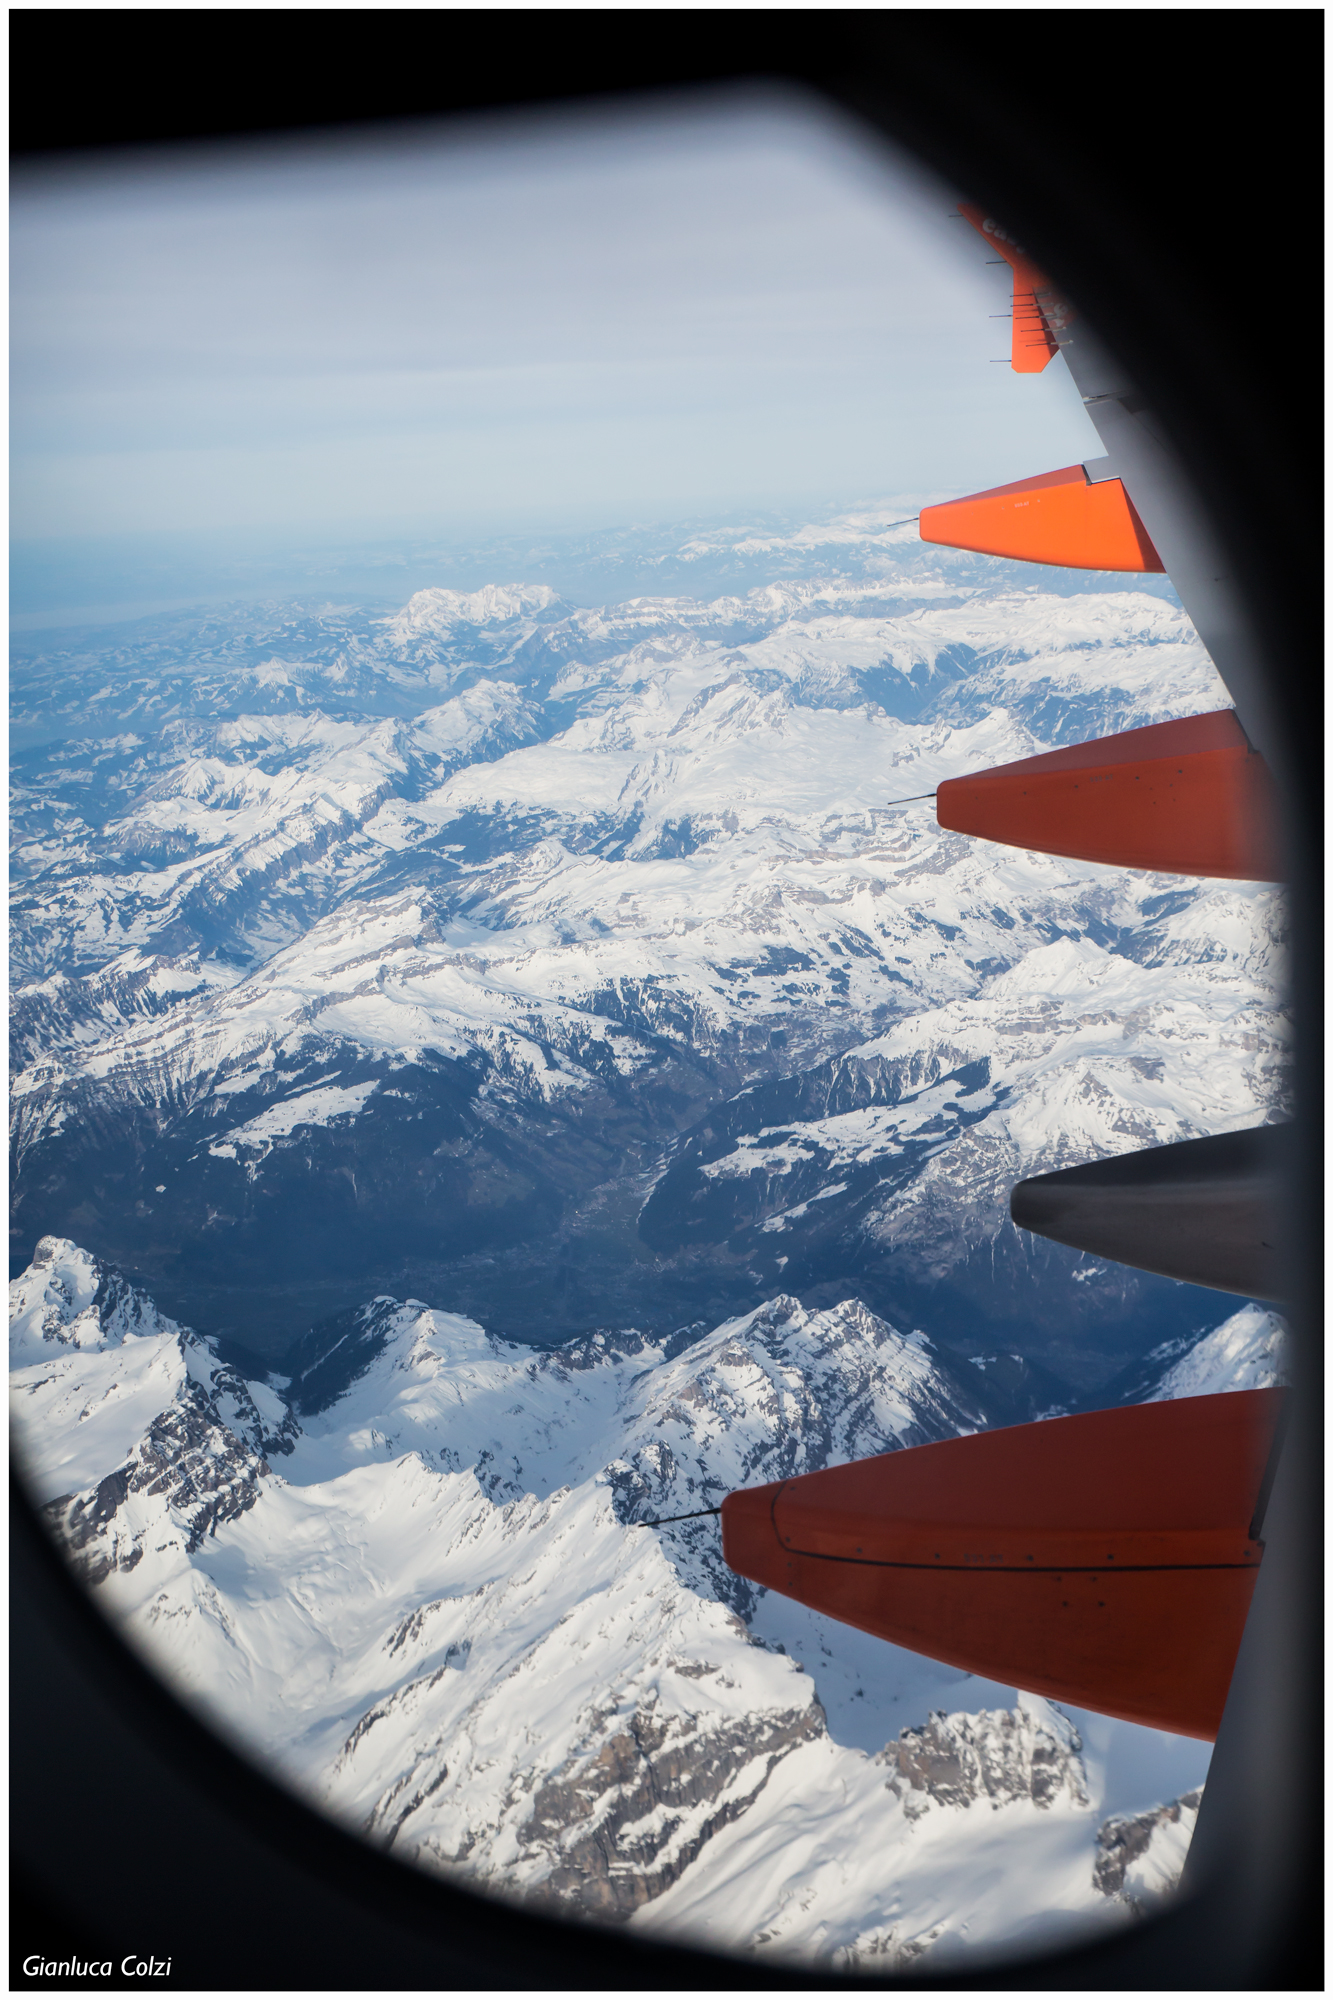 Flying over the Alps...